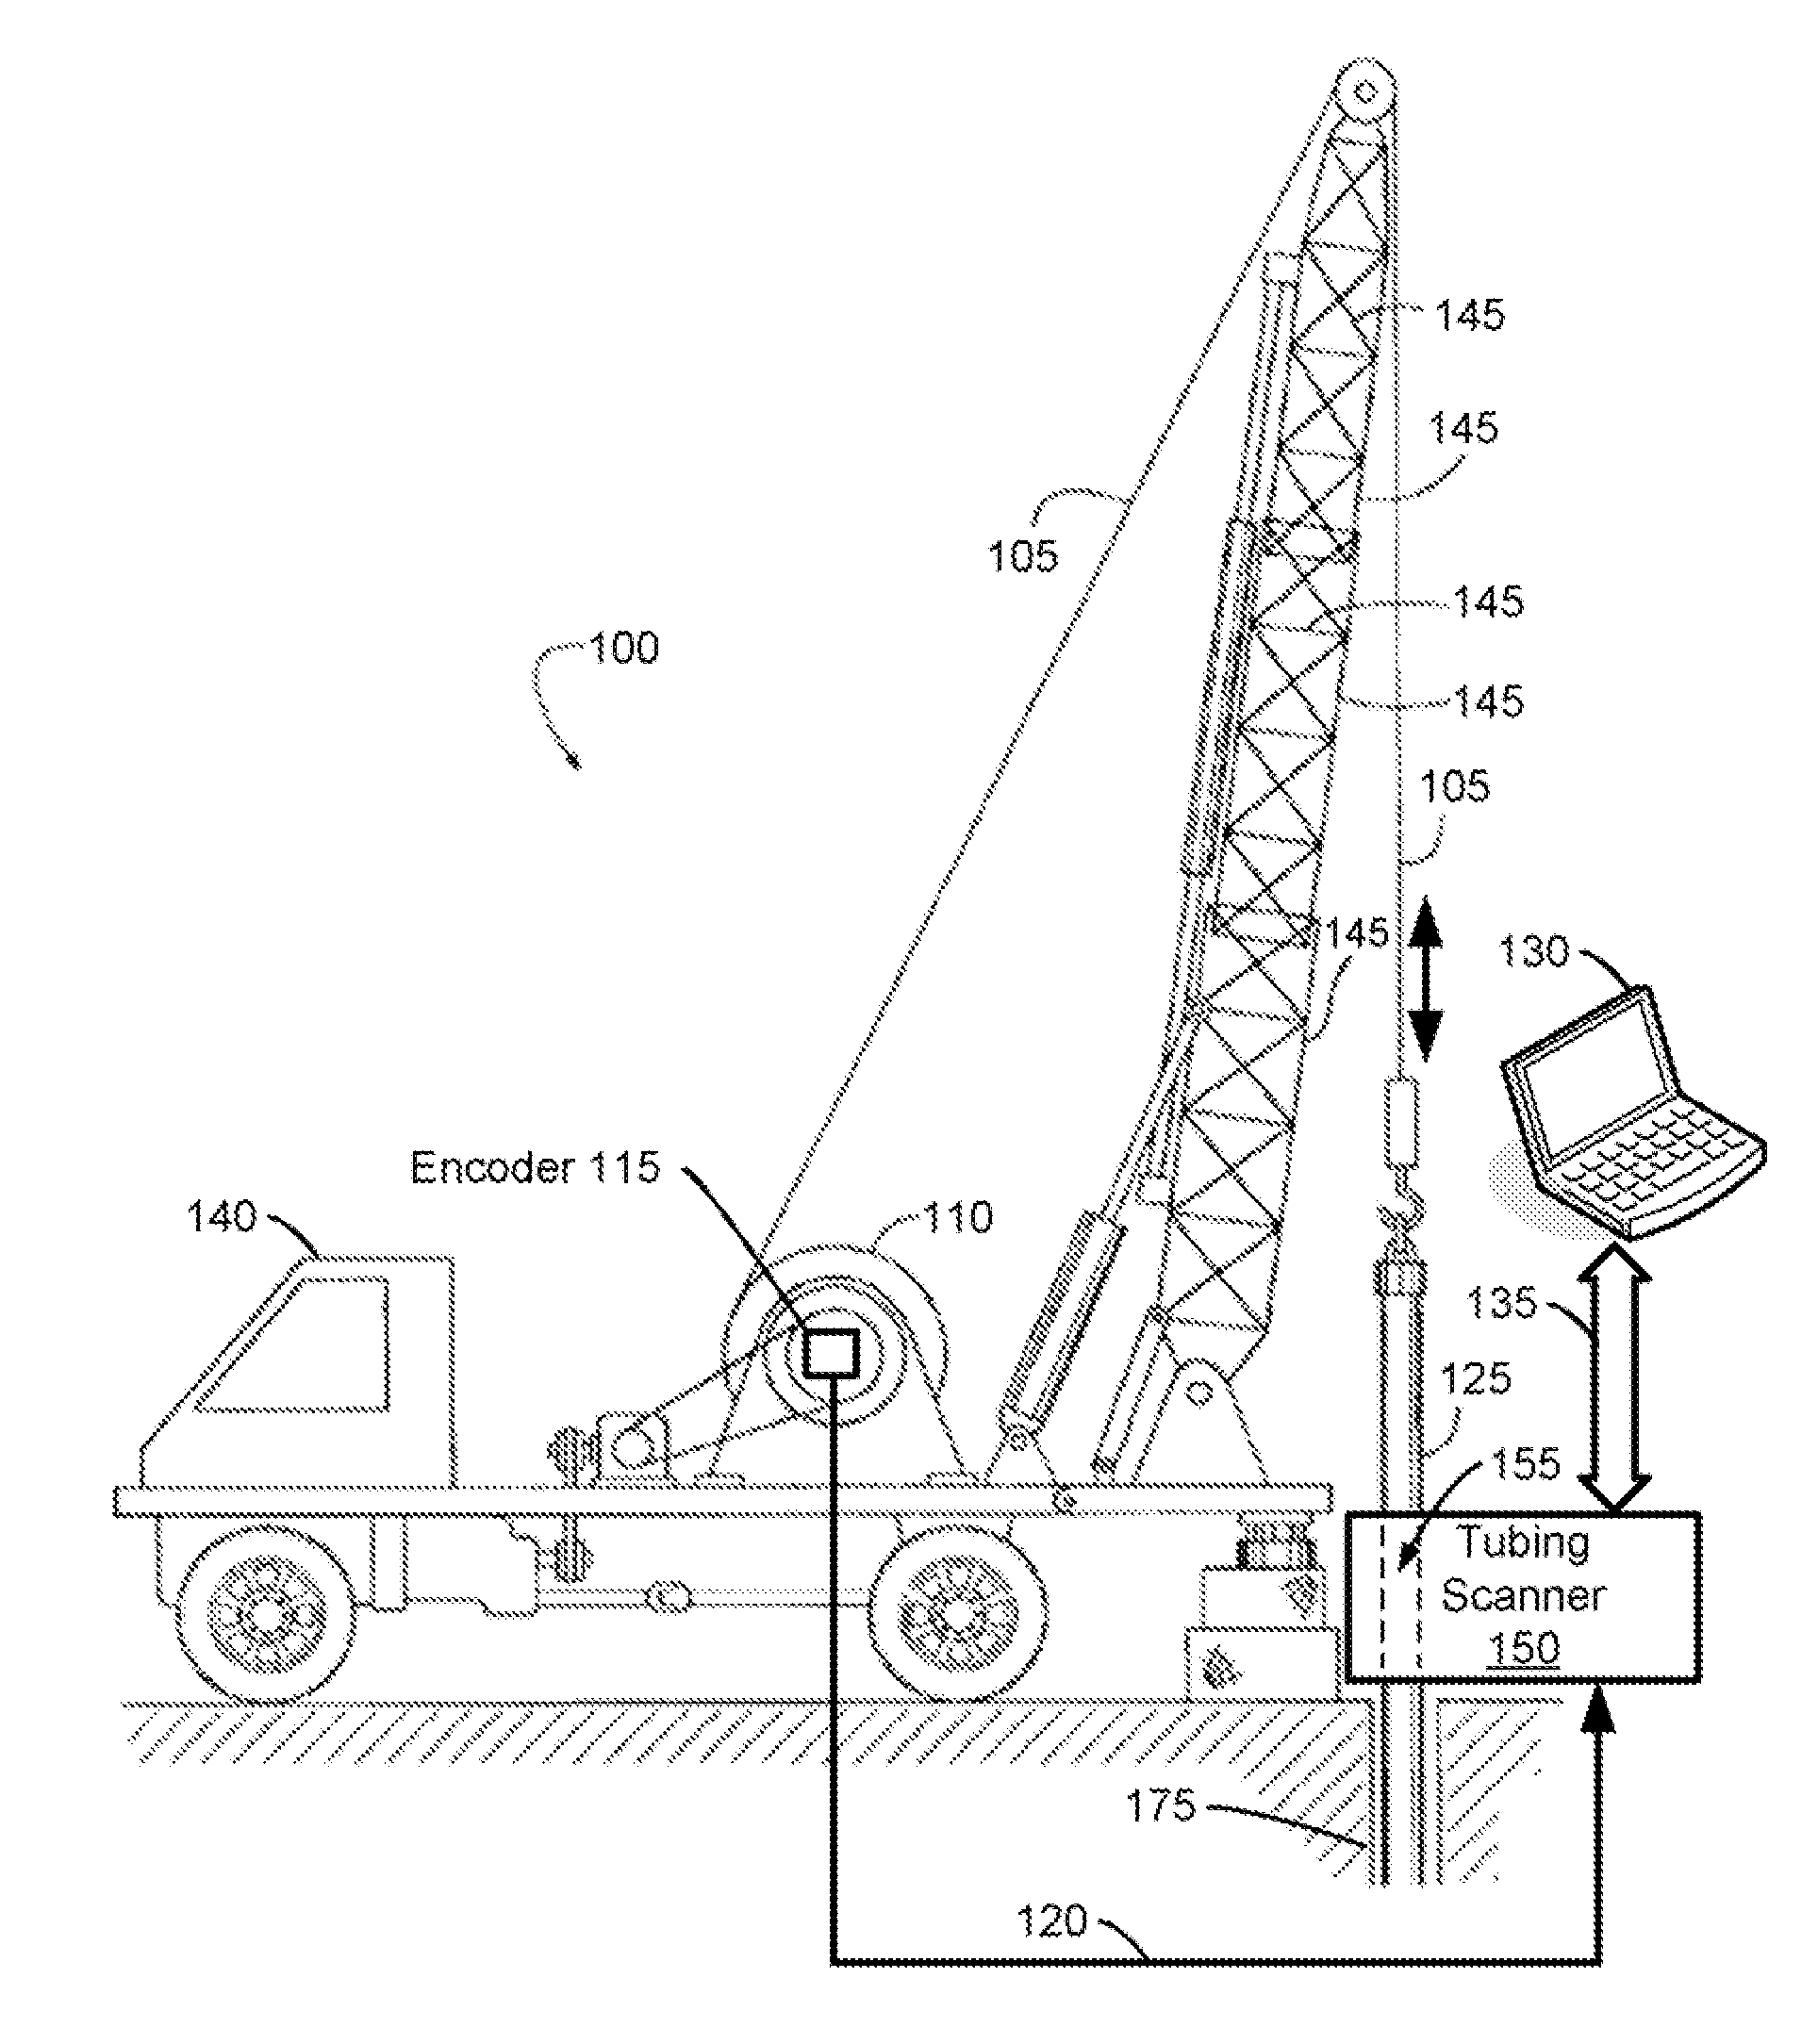 Method and system for interpreting tubing data